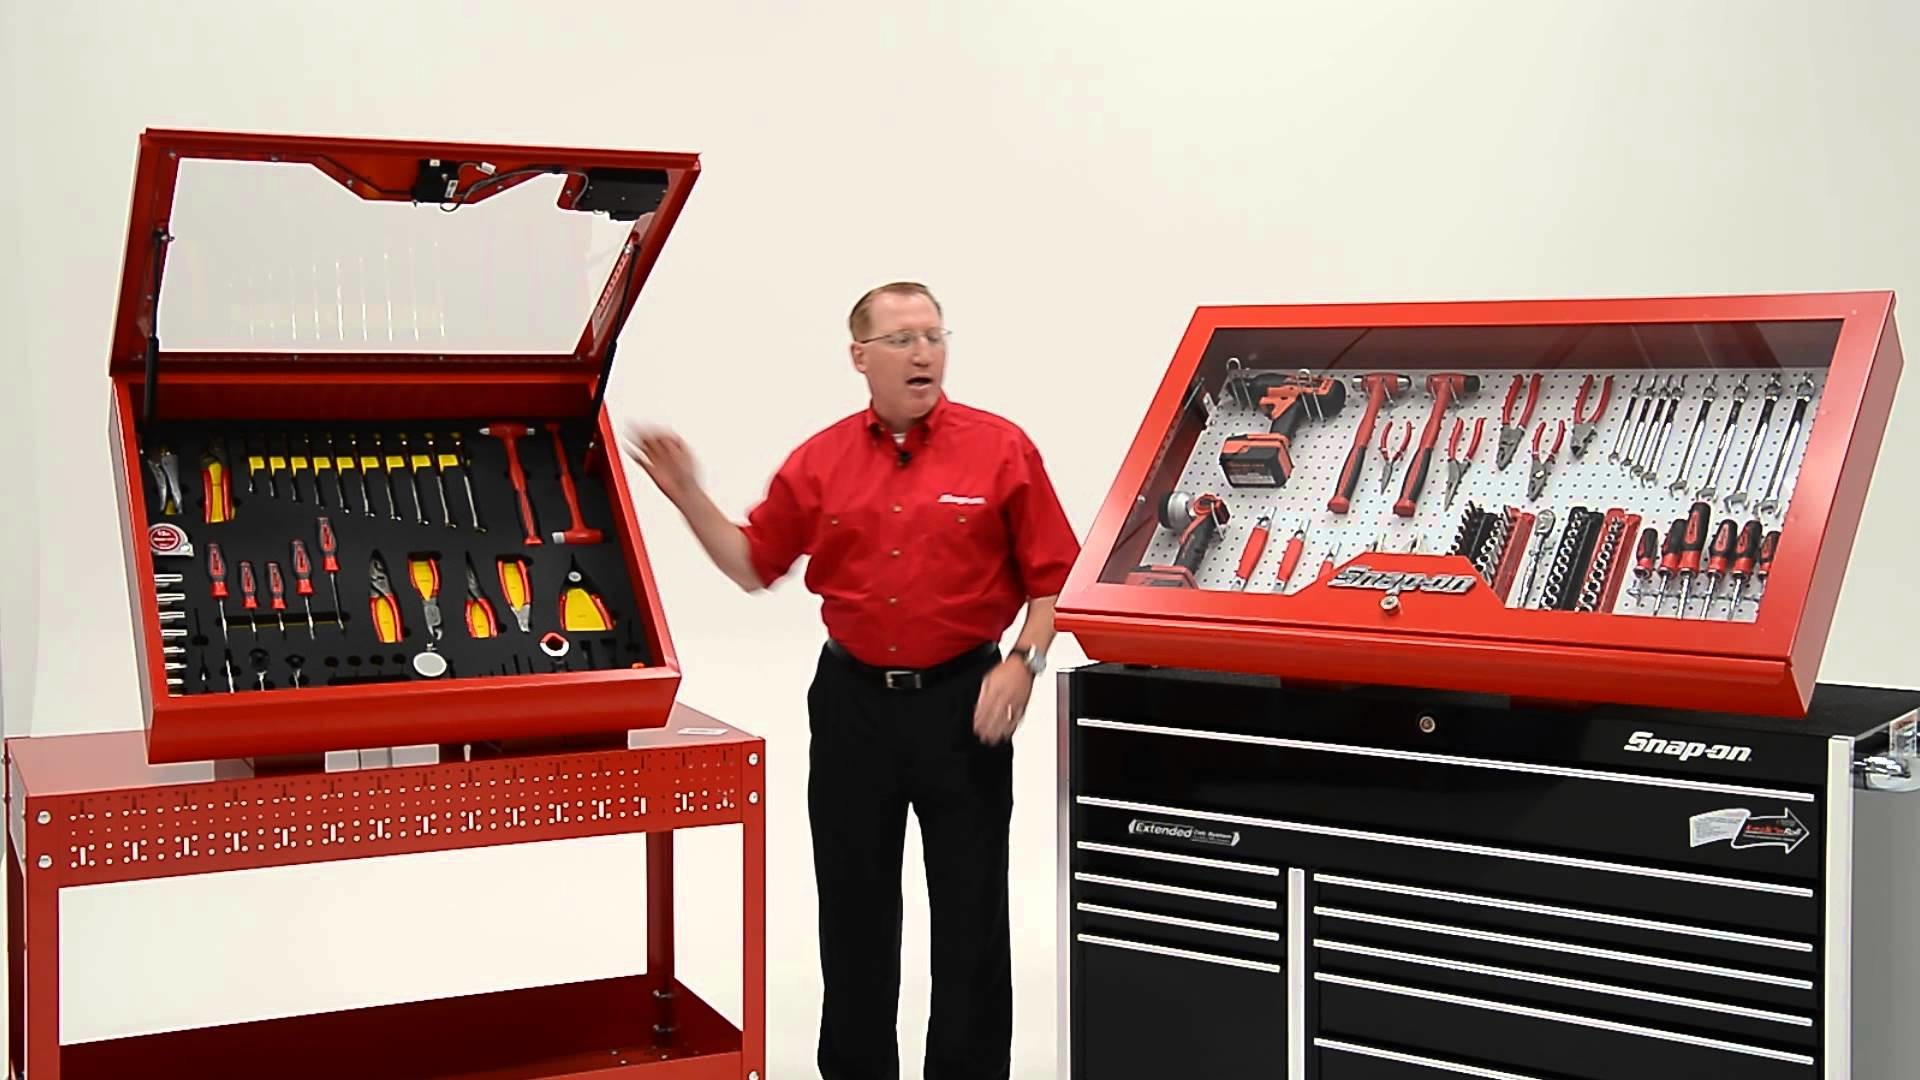 1920x1080 Visual Control Cabinet Snap-on Industrial Product Demo